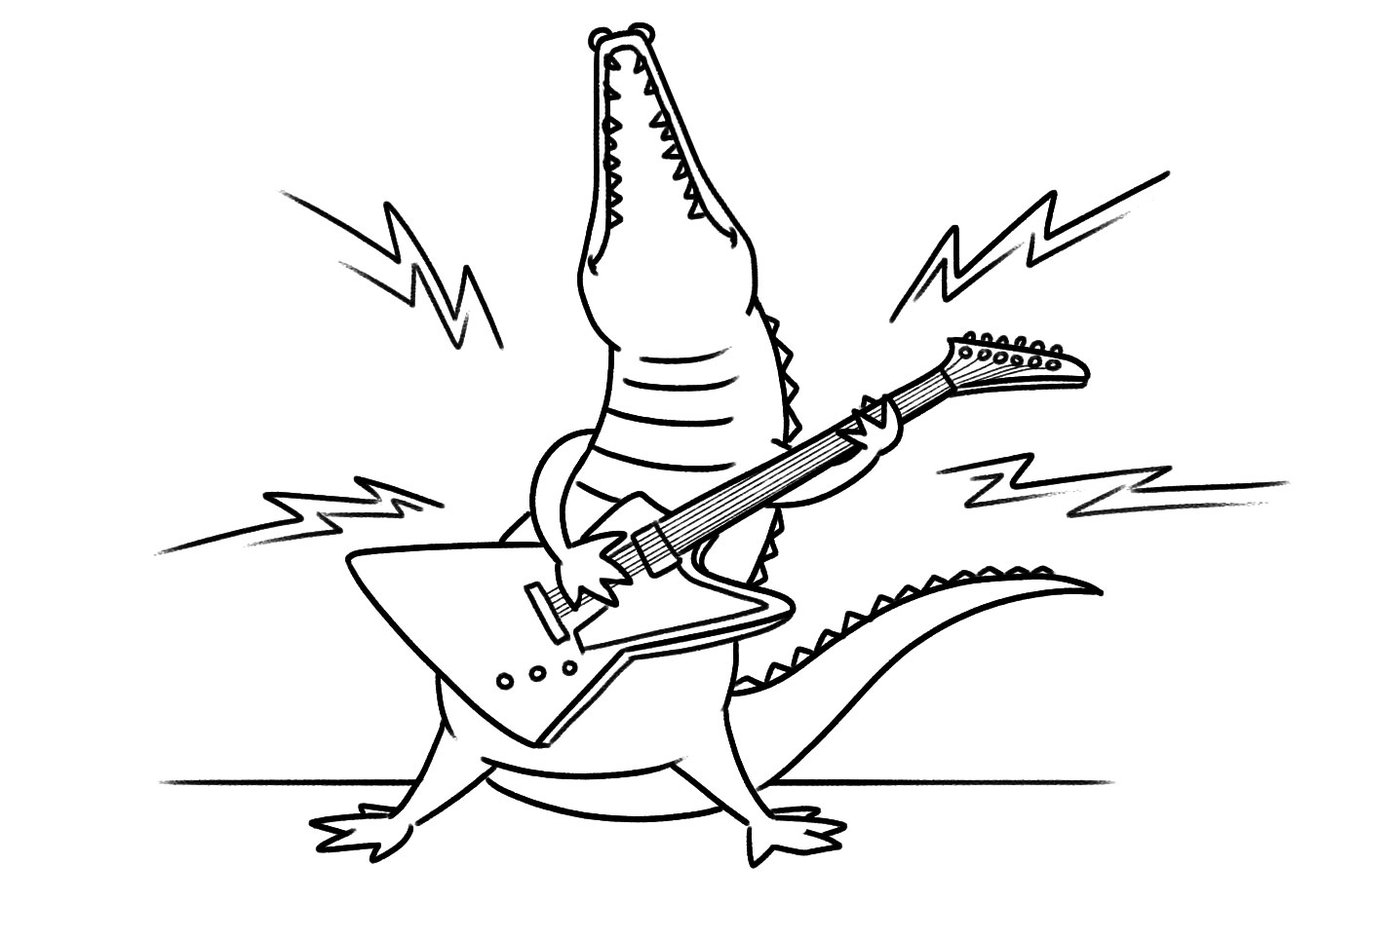 croc-guitar-face-turn-accents